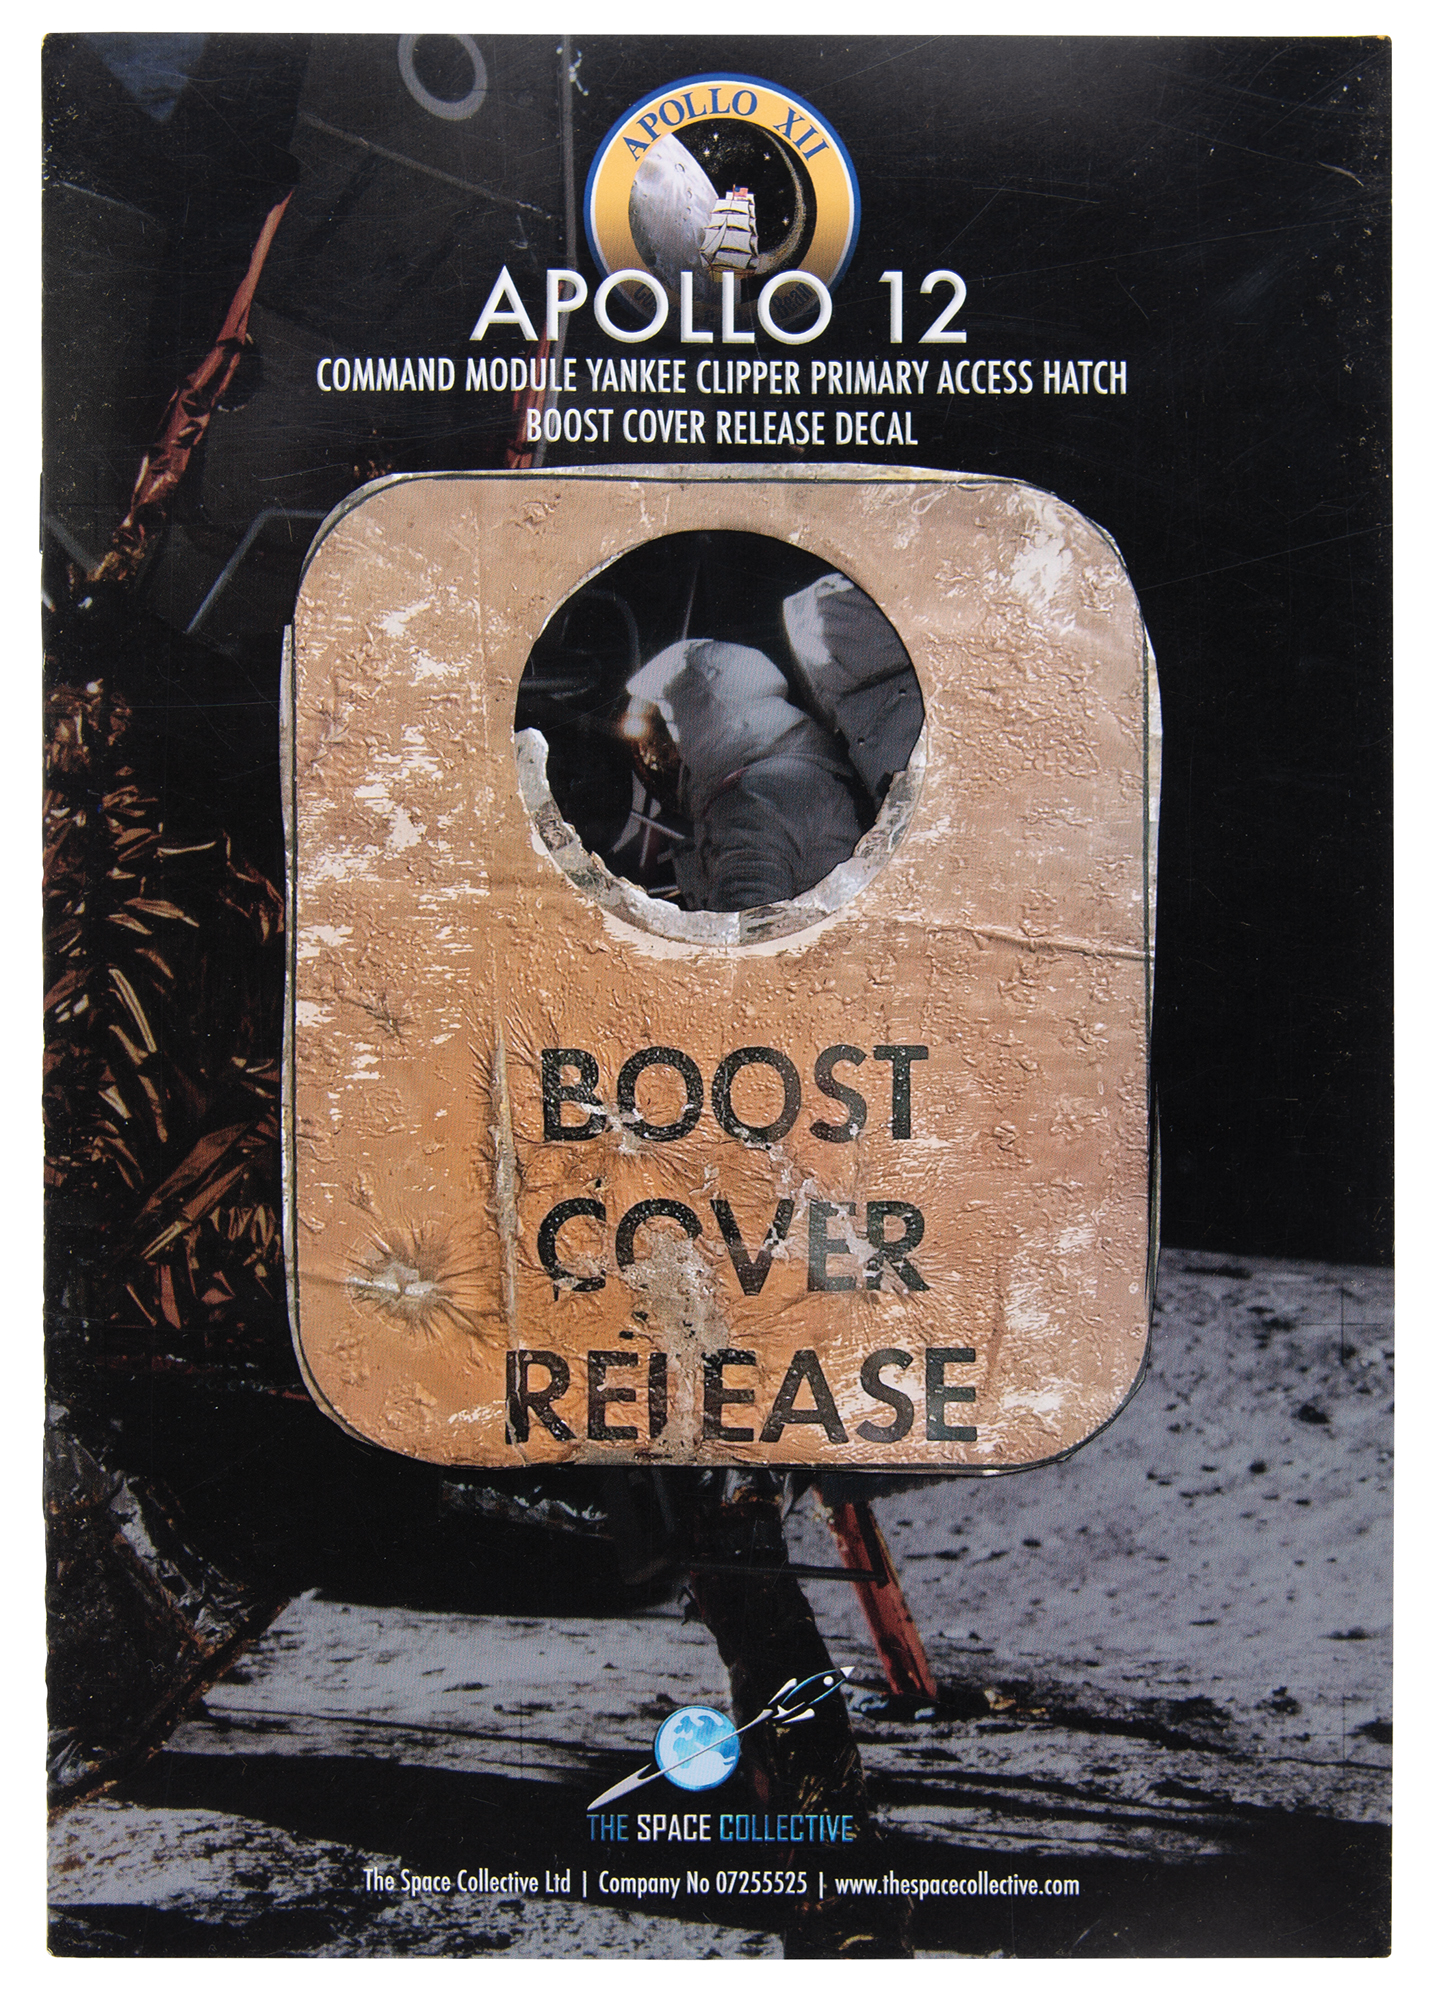 Lot #4163 Apollo 12 Flown 'Boost Cover Release' Hatch Label from the Command Module Yankee Clipper - Image 4